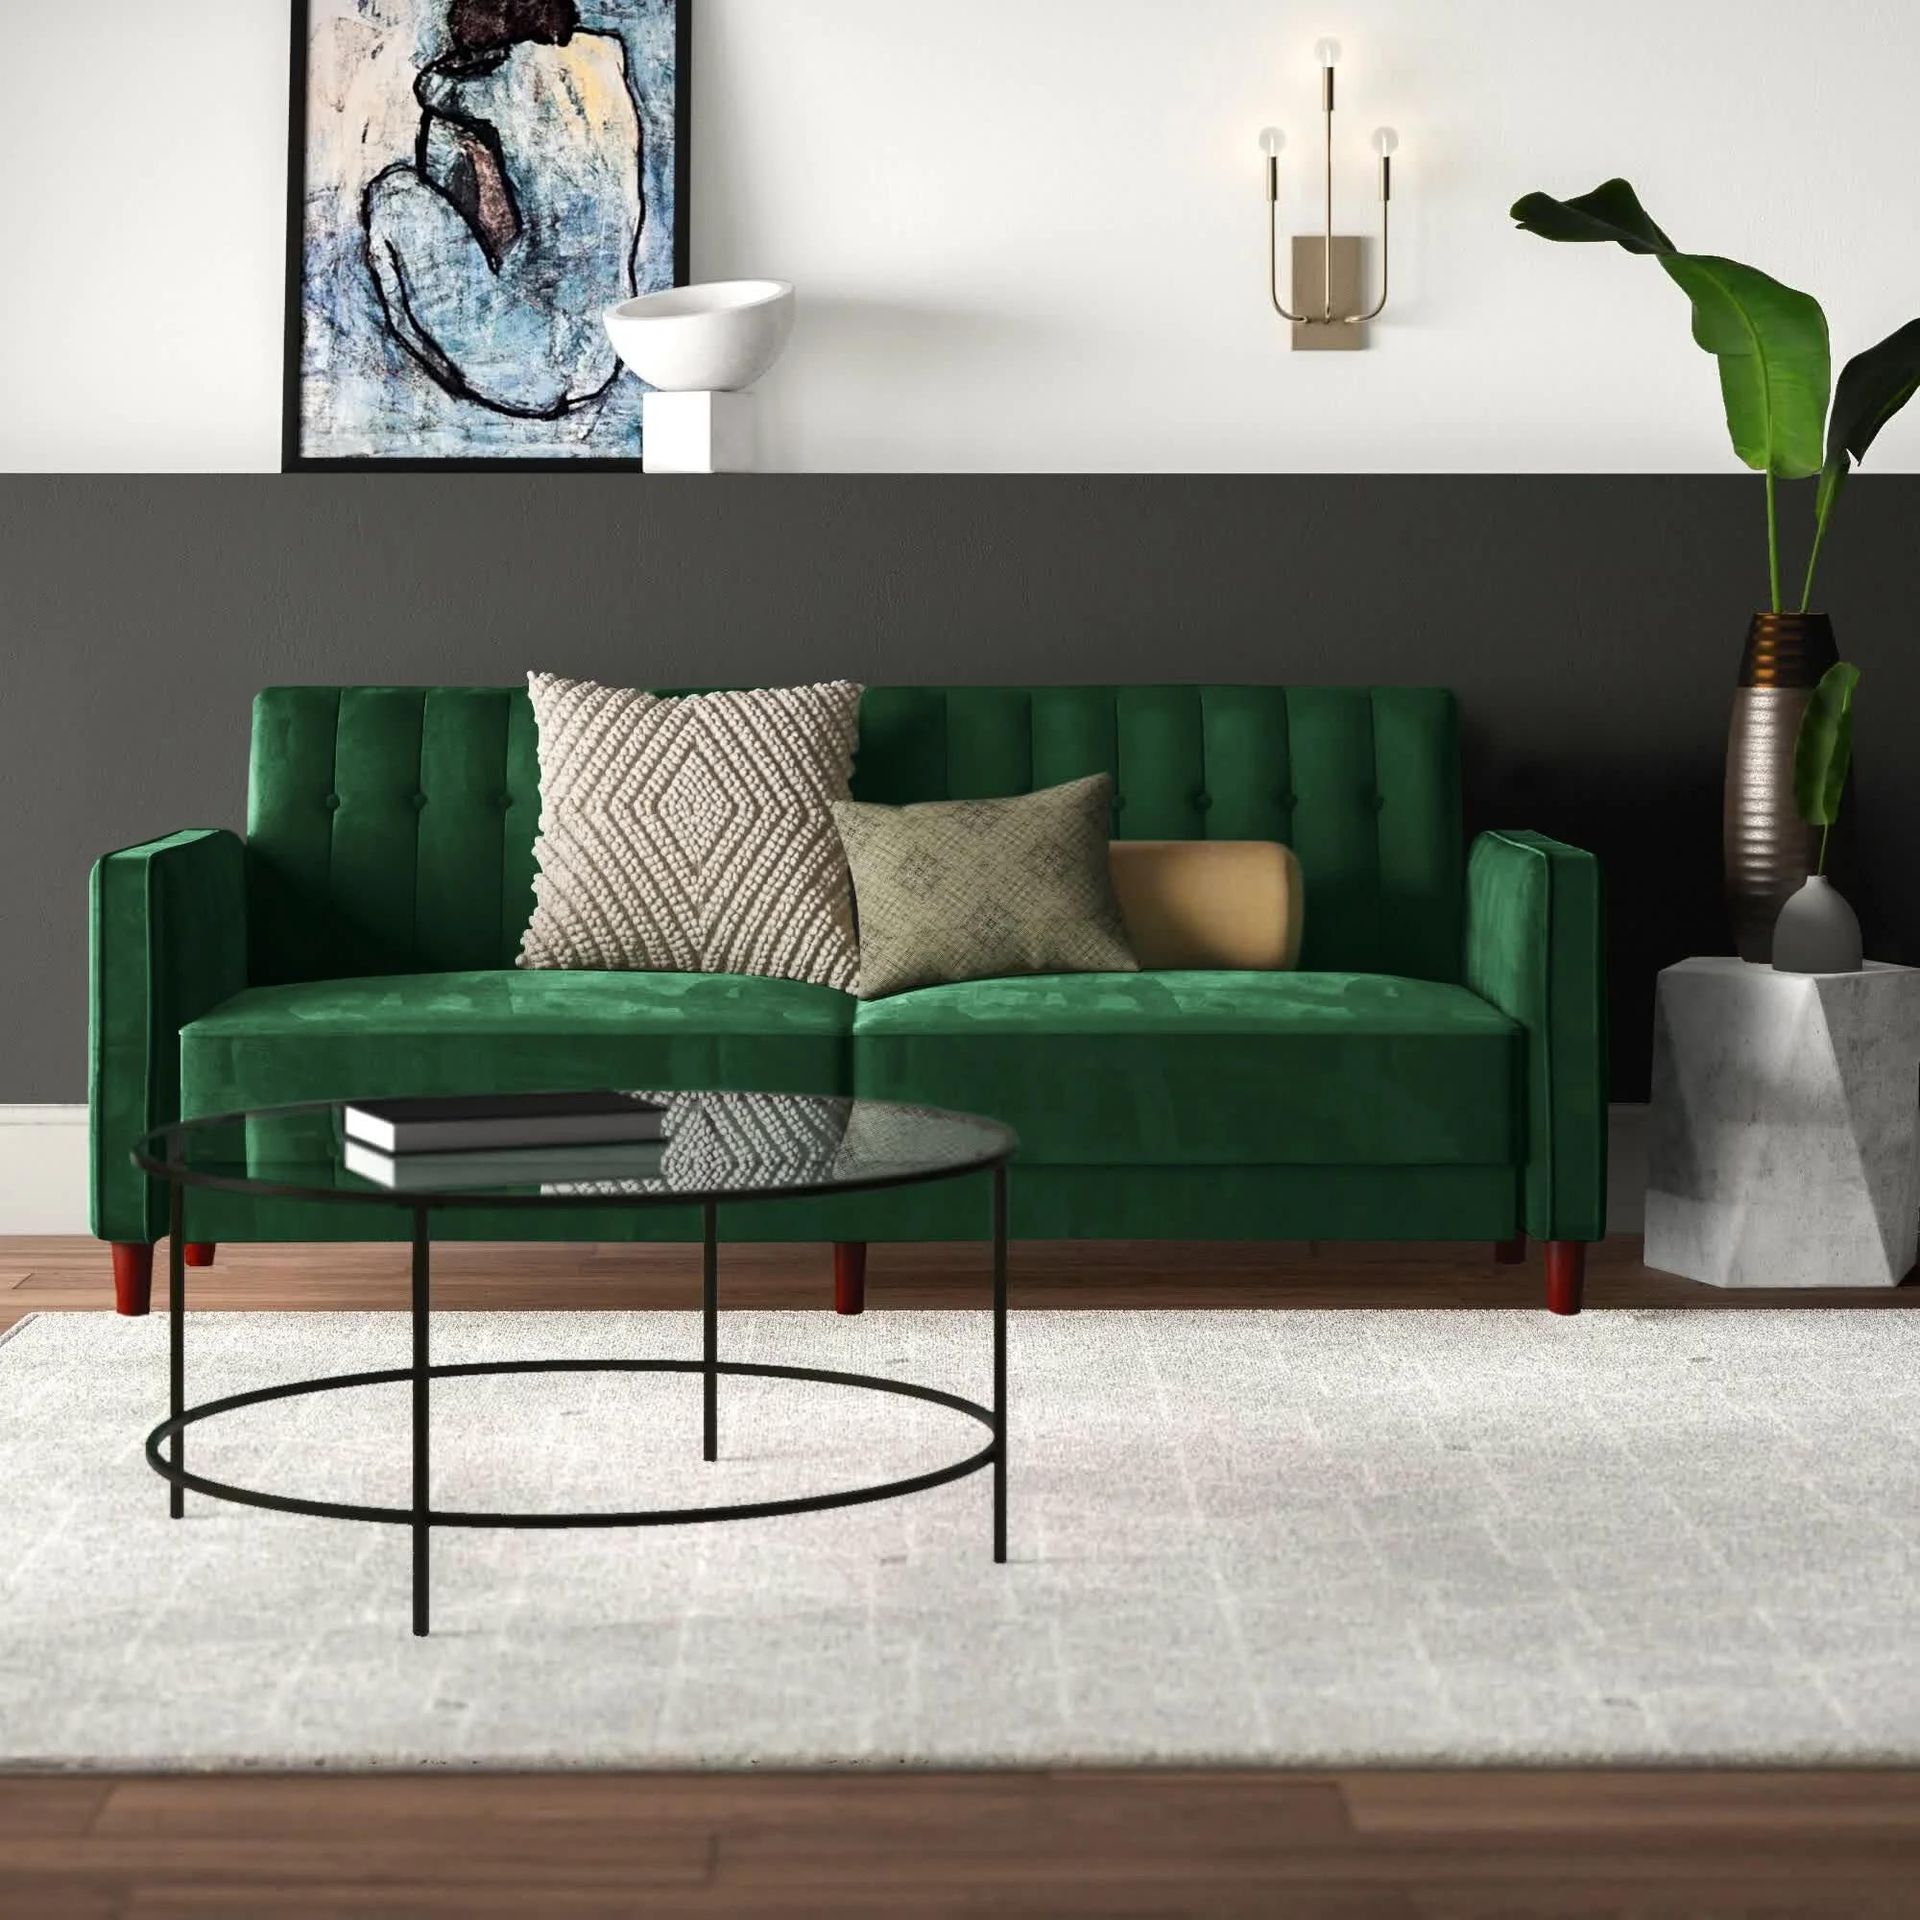 I’m a shopping writer: here's where to buy cheap furniture